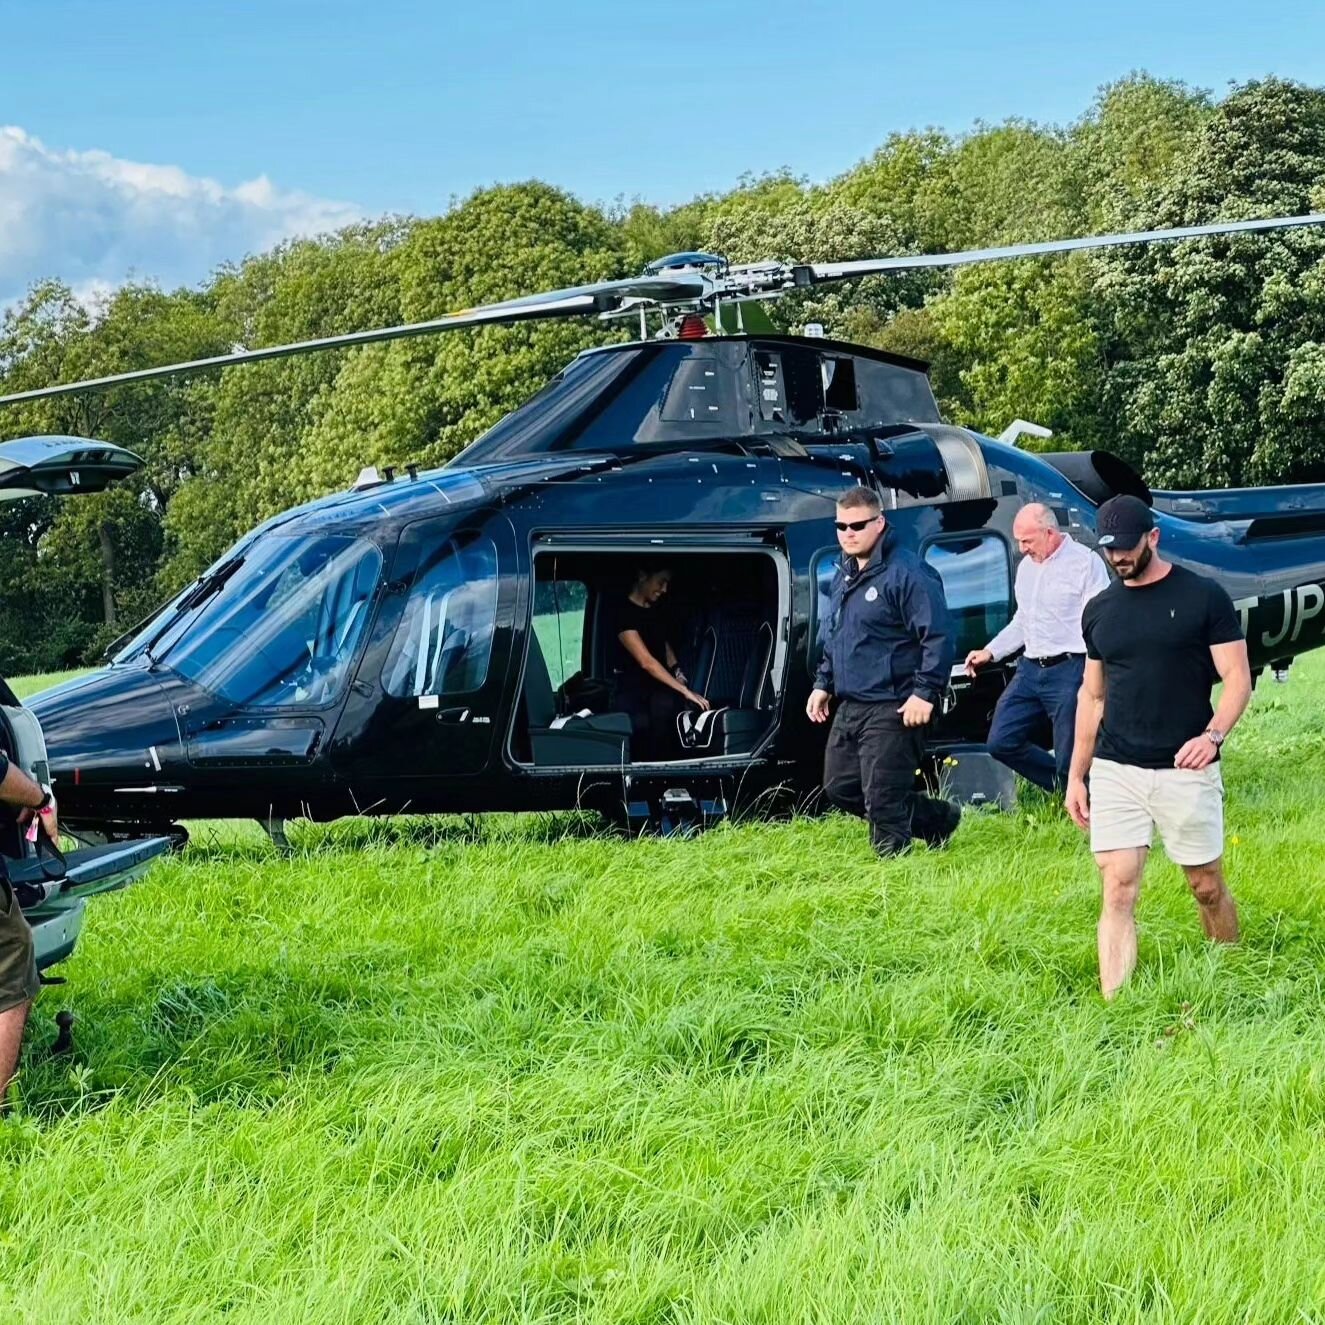 I've done a few jobs in my time, escorting 2 guests to their Helicopter was a new one for me. 

Lucky @delta_tango2 was on hand with the @eame_hill team too!

@soulcircusfestival 

🎪🚁